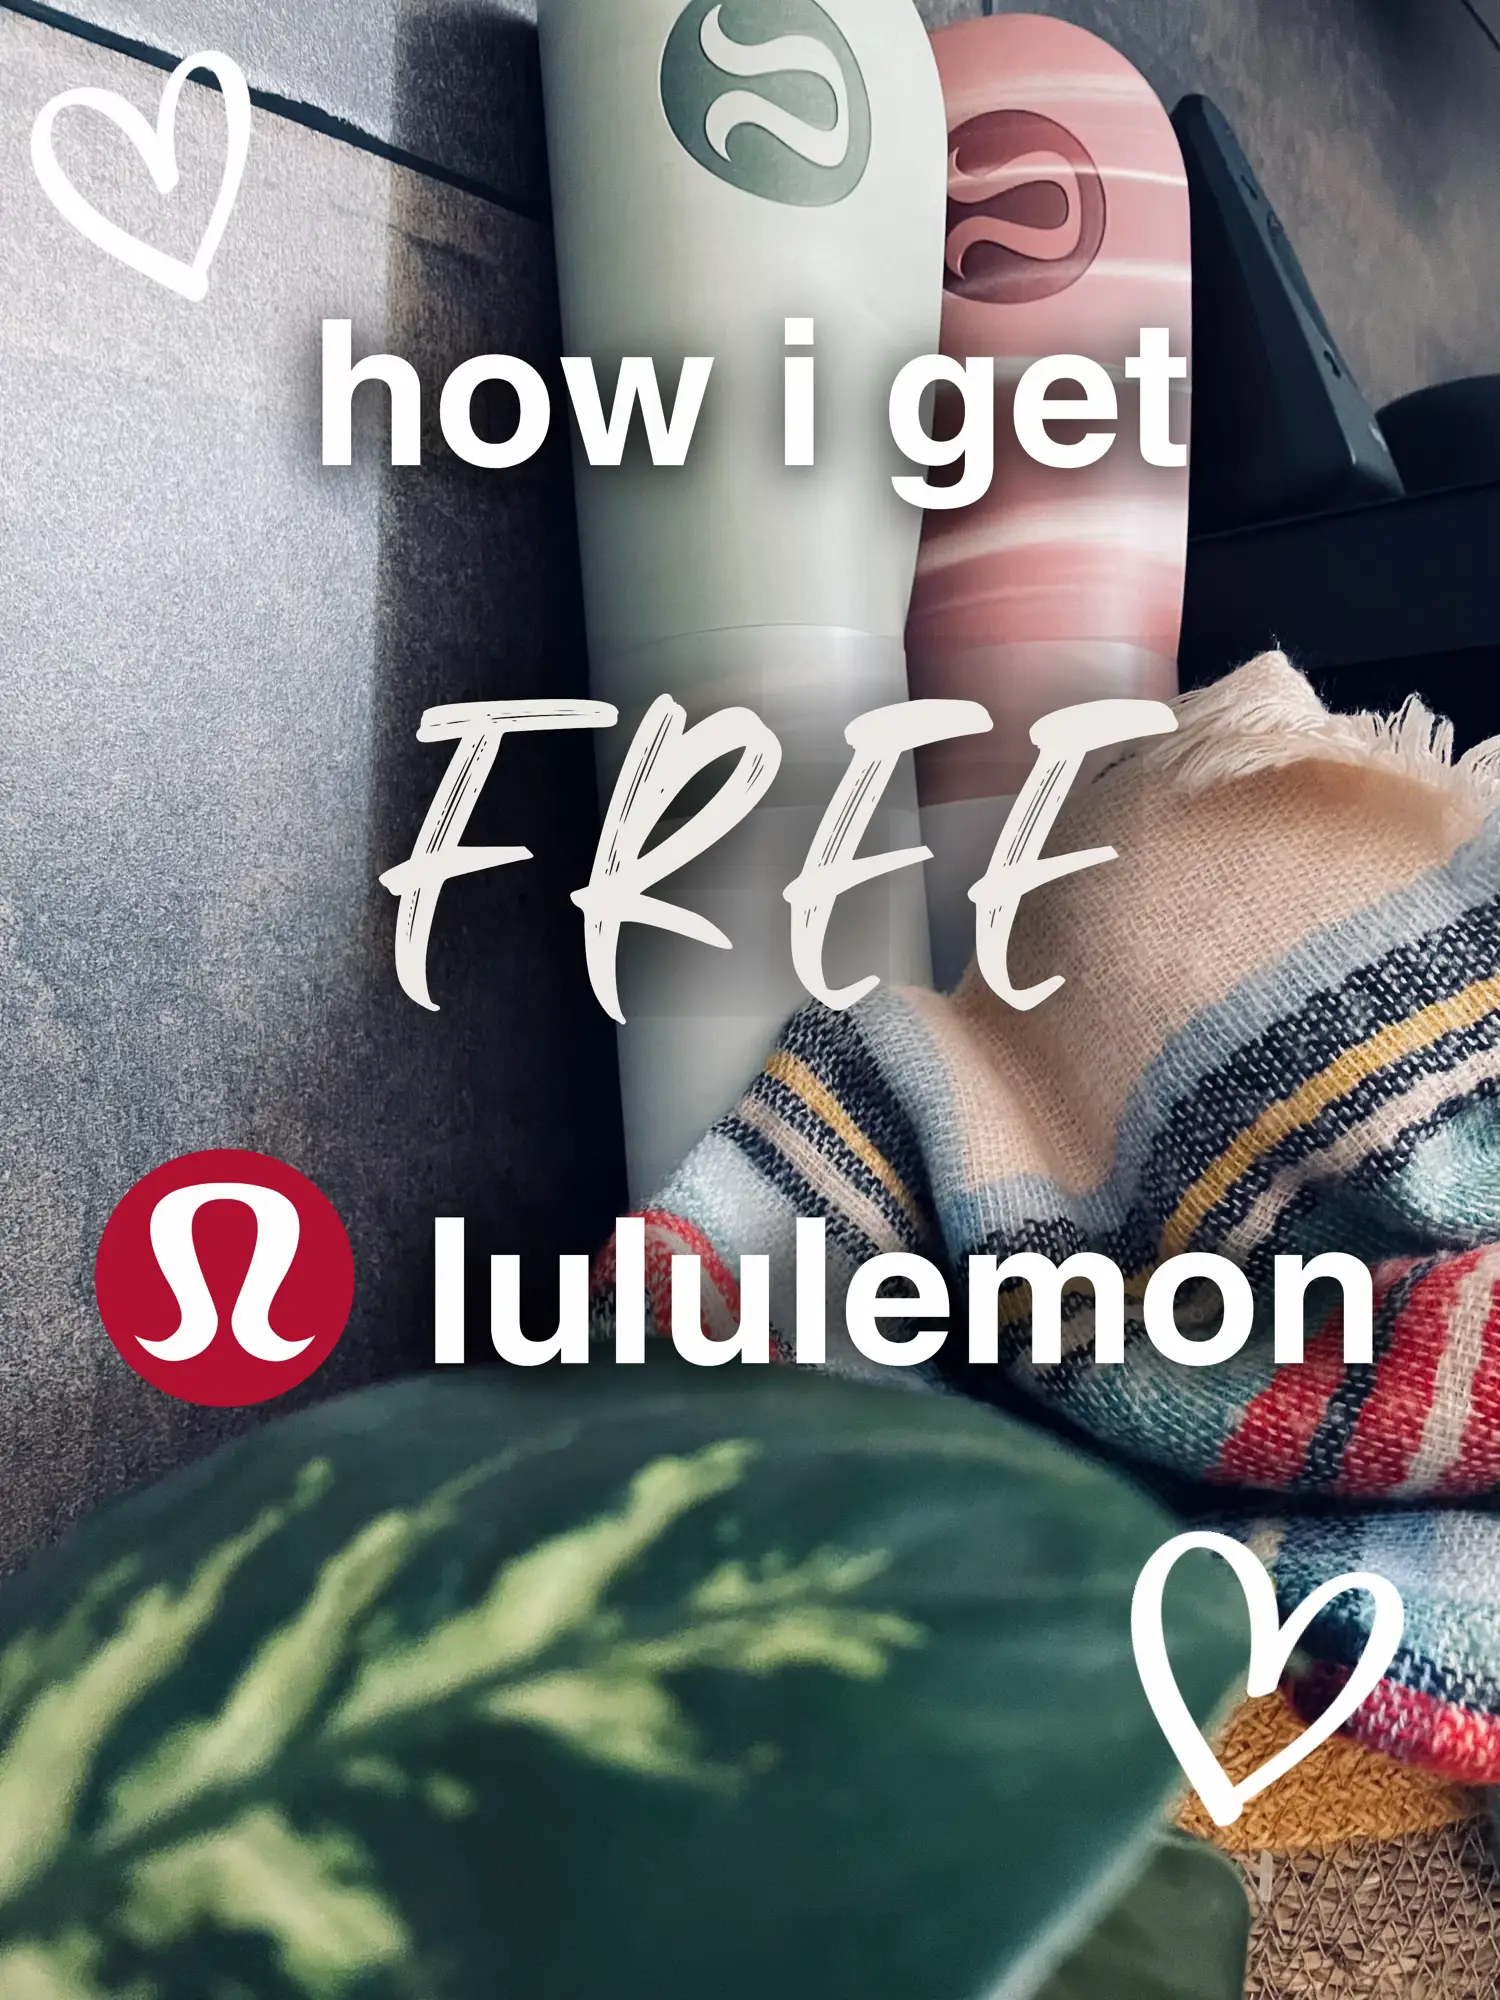 New arrivals from @lululemon 🫶 Drop by the store to try them on 😌 Visit  the link in bio to browse what's available online!